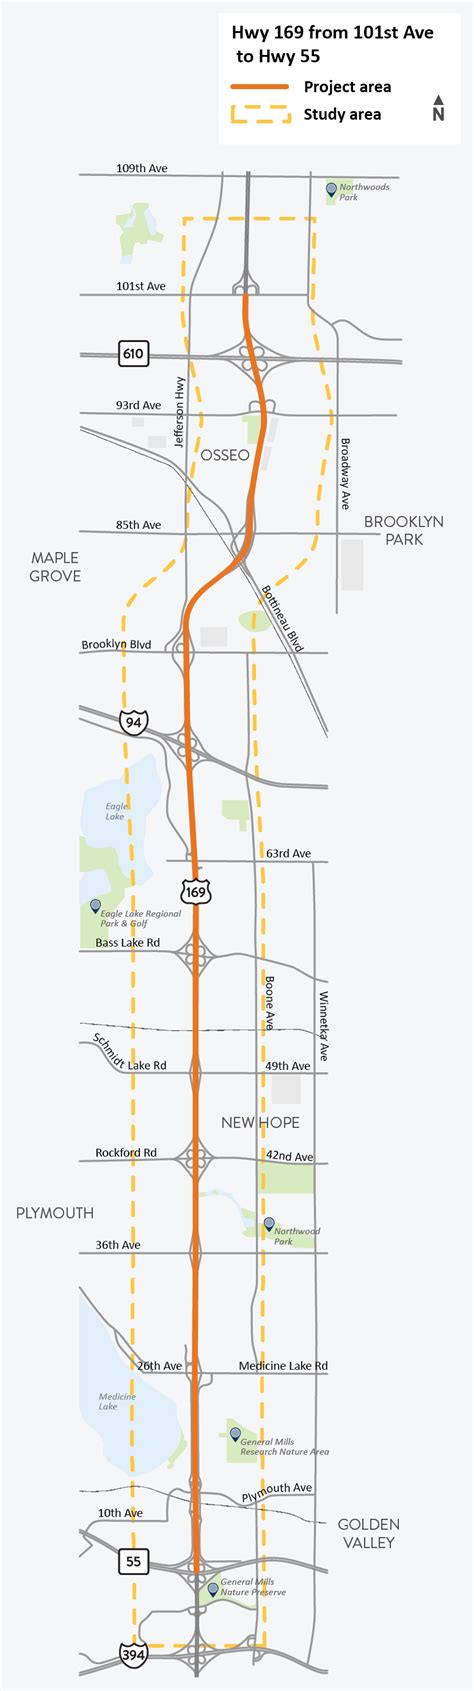 Mndot Studying Hwy 169 Improvements In West Metro Ccx Media